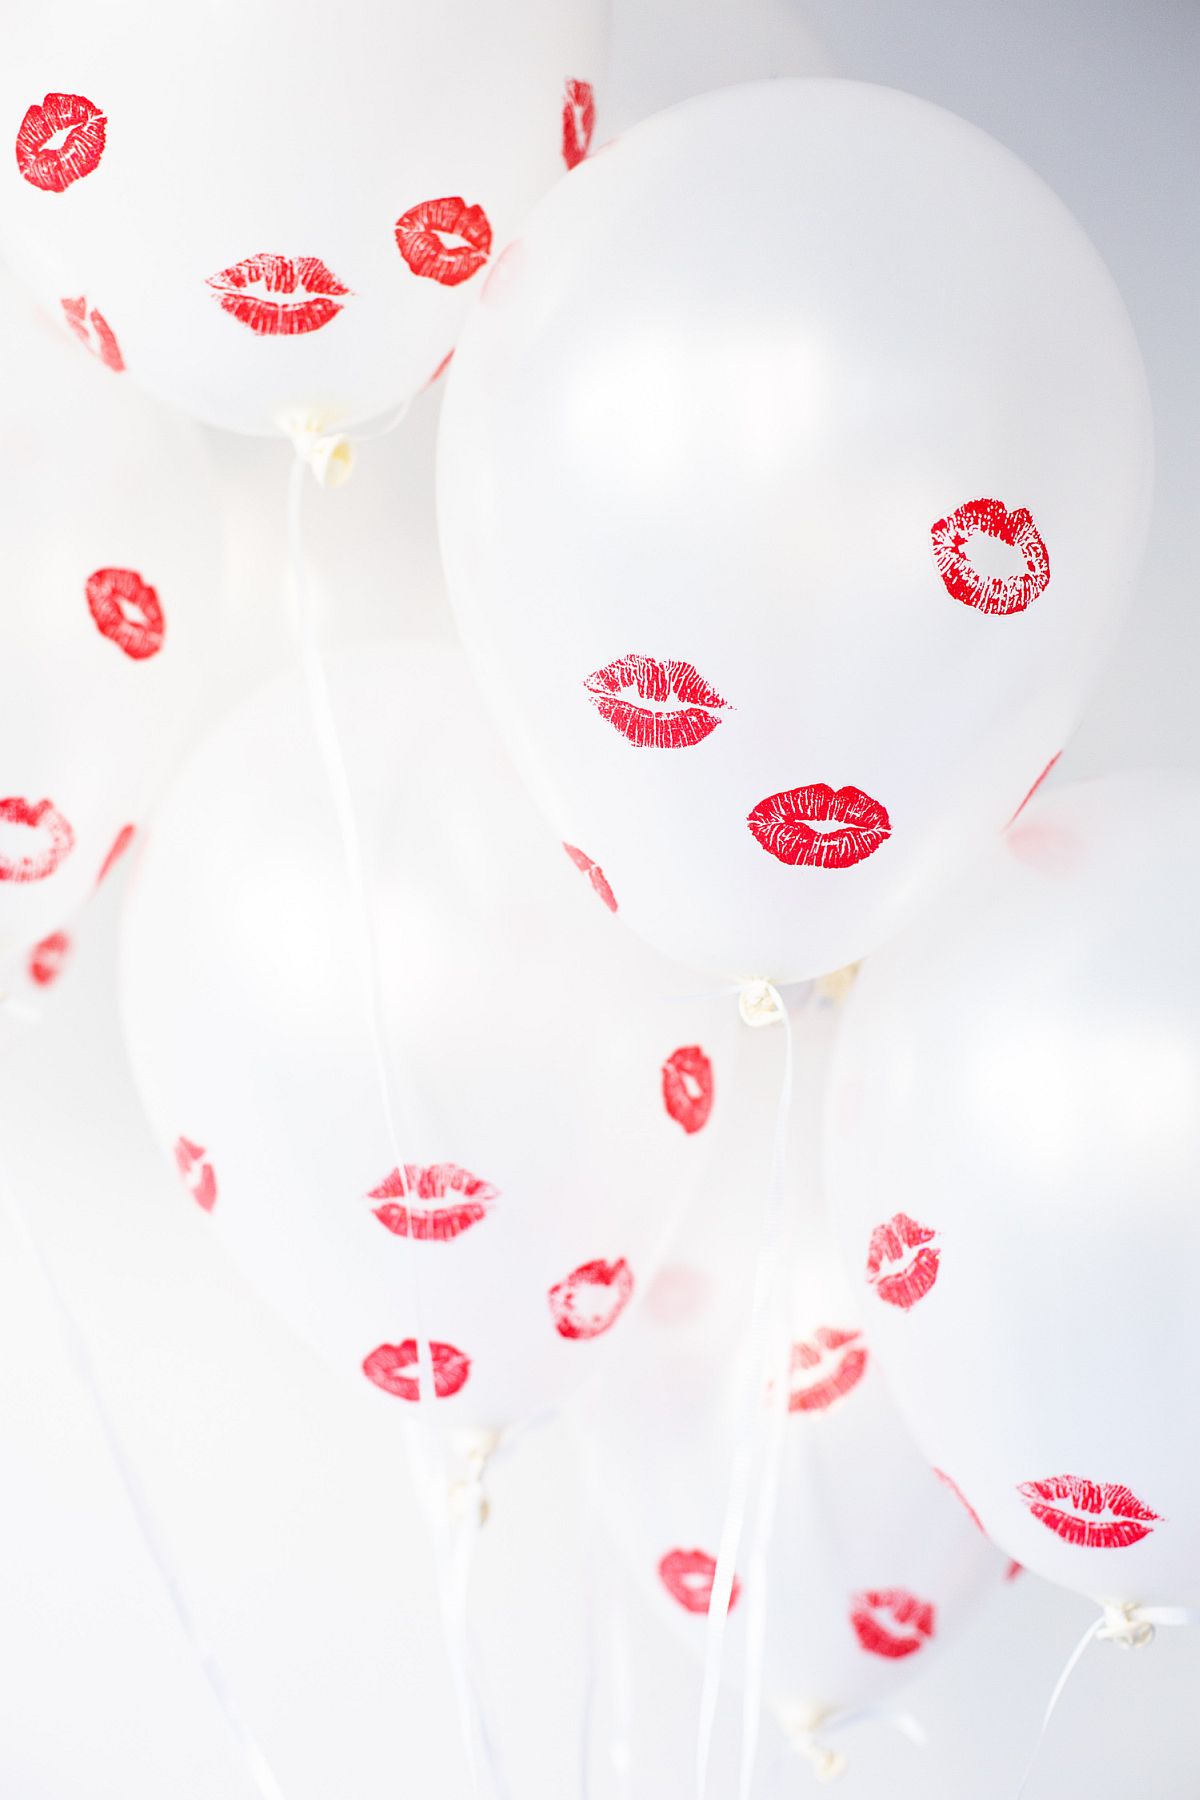 Fun and easy-to-make DIY Kissed Balloons from Balloon Time